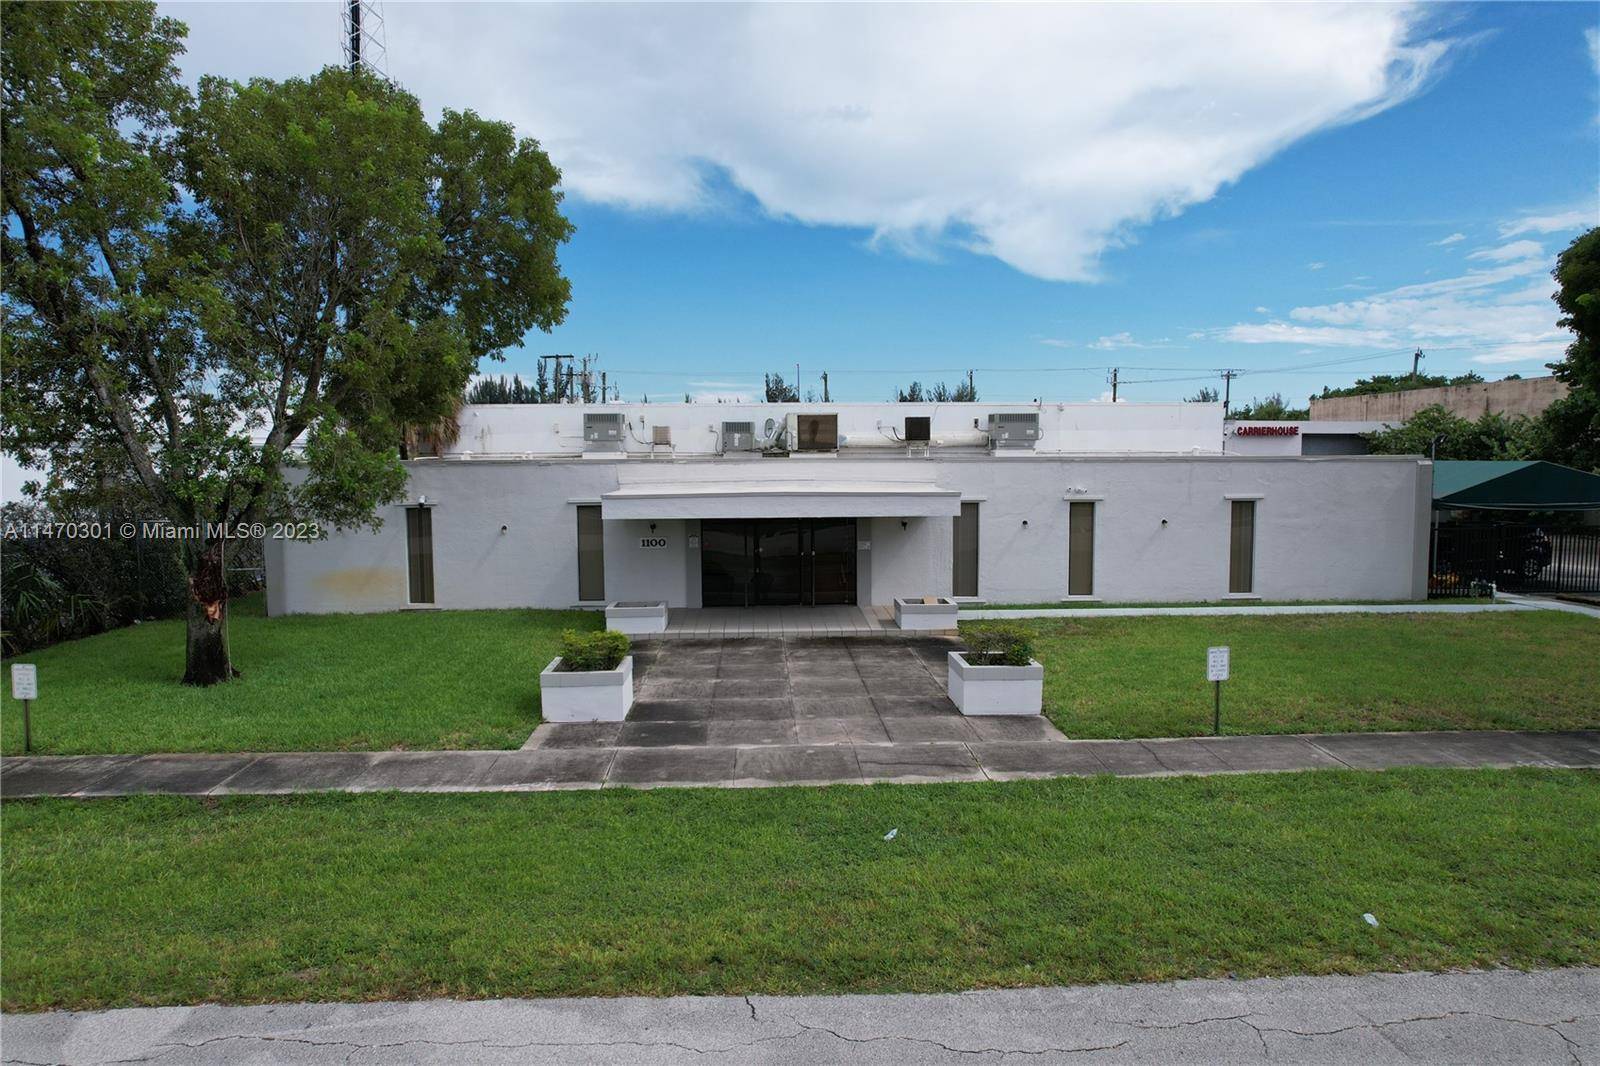 The subject property encompasses a 23, 331 square foot building situated on a generous 47, 550 square foot lot within Sunshine State Industrial Park along NW 163th Drive.